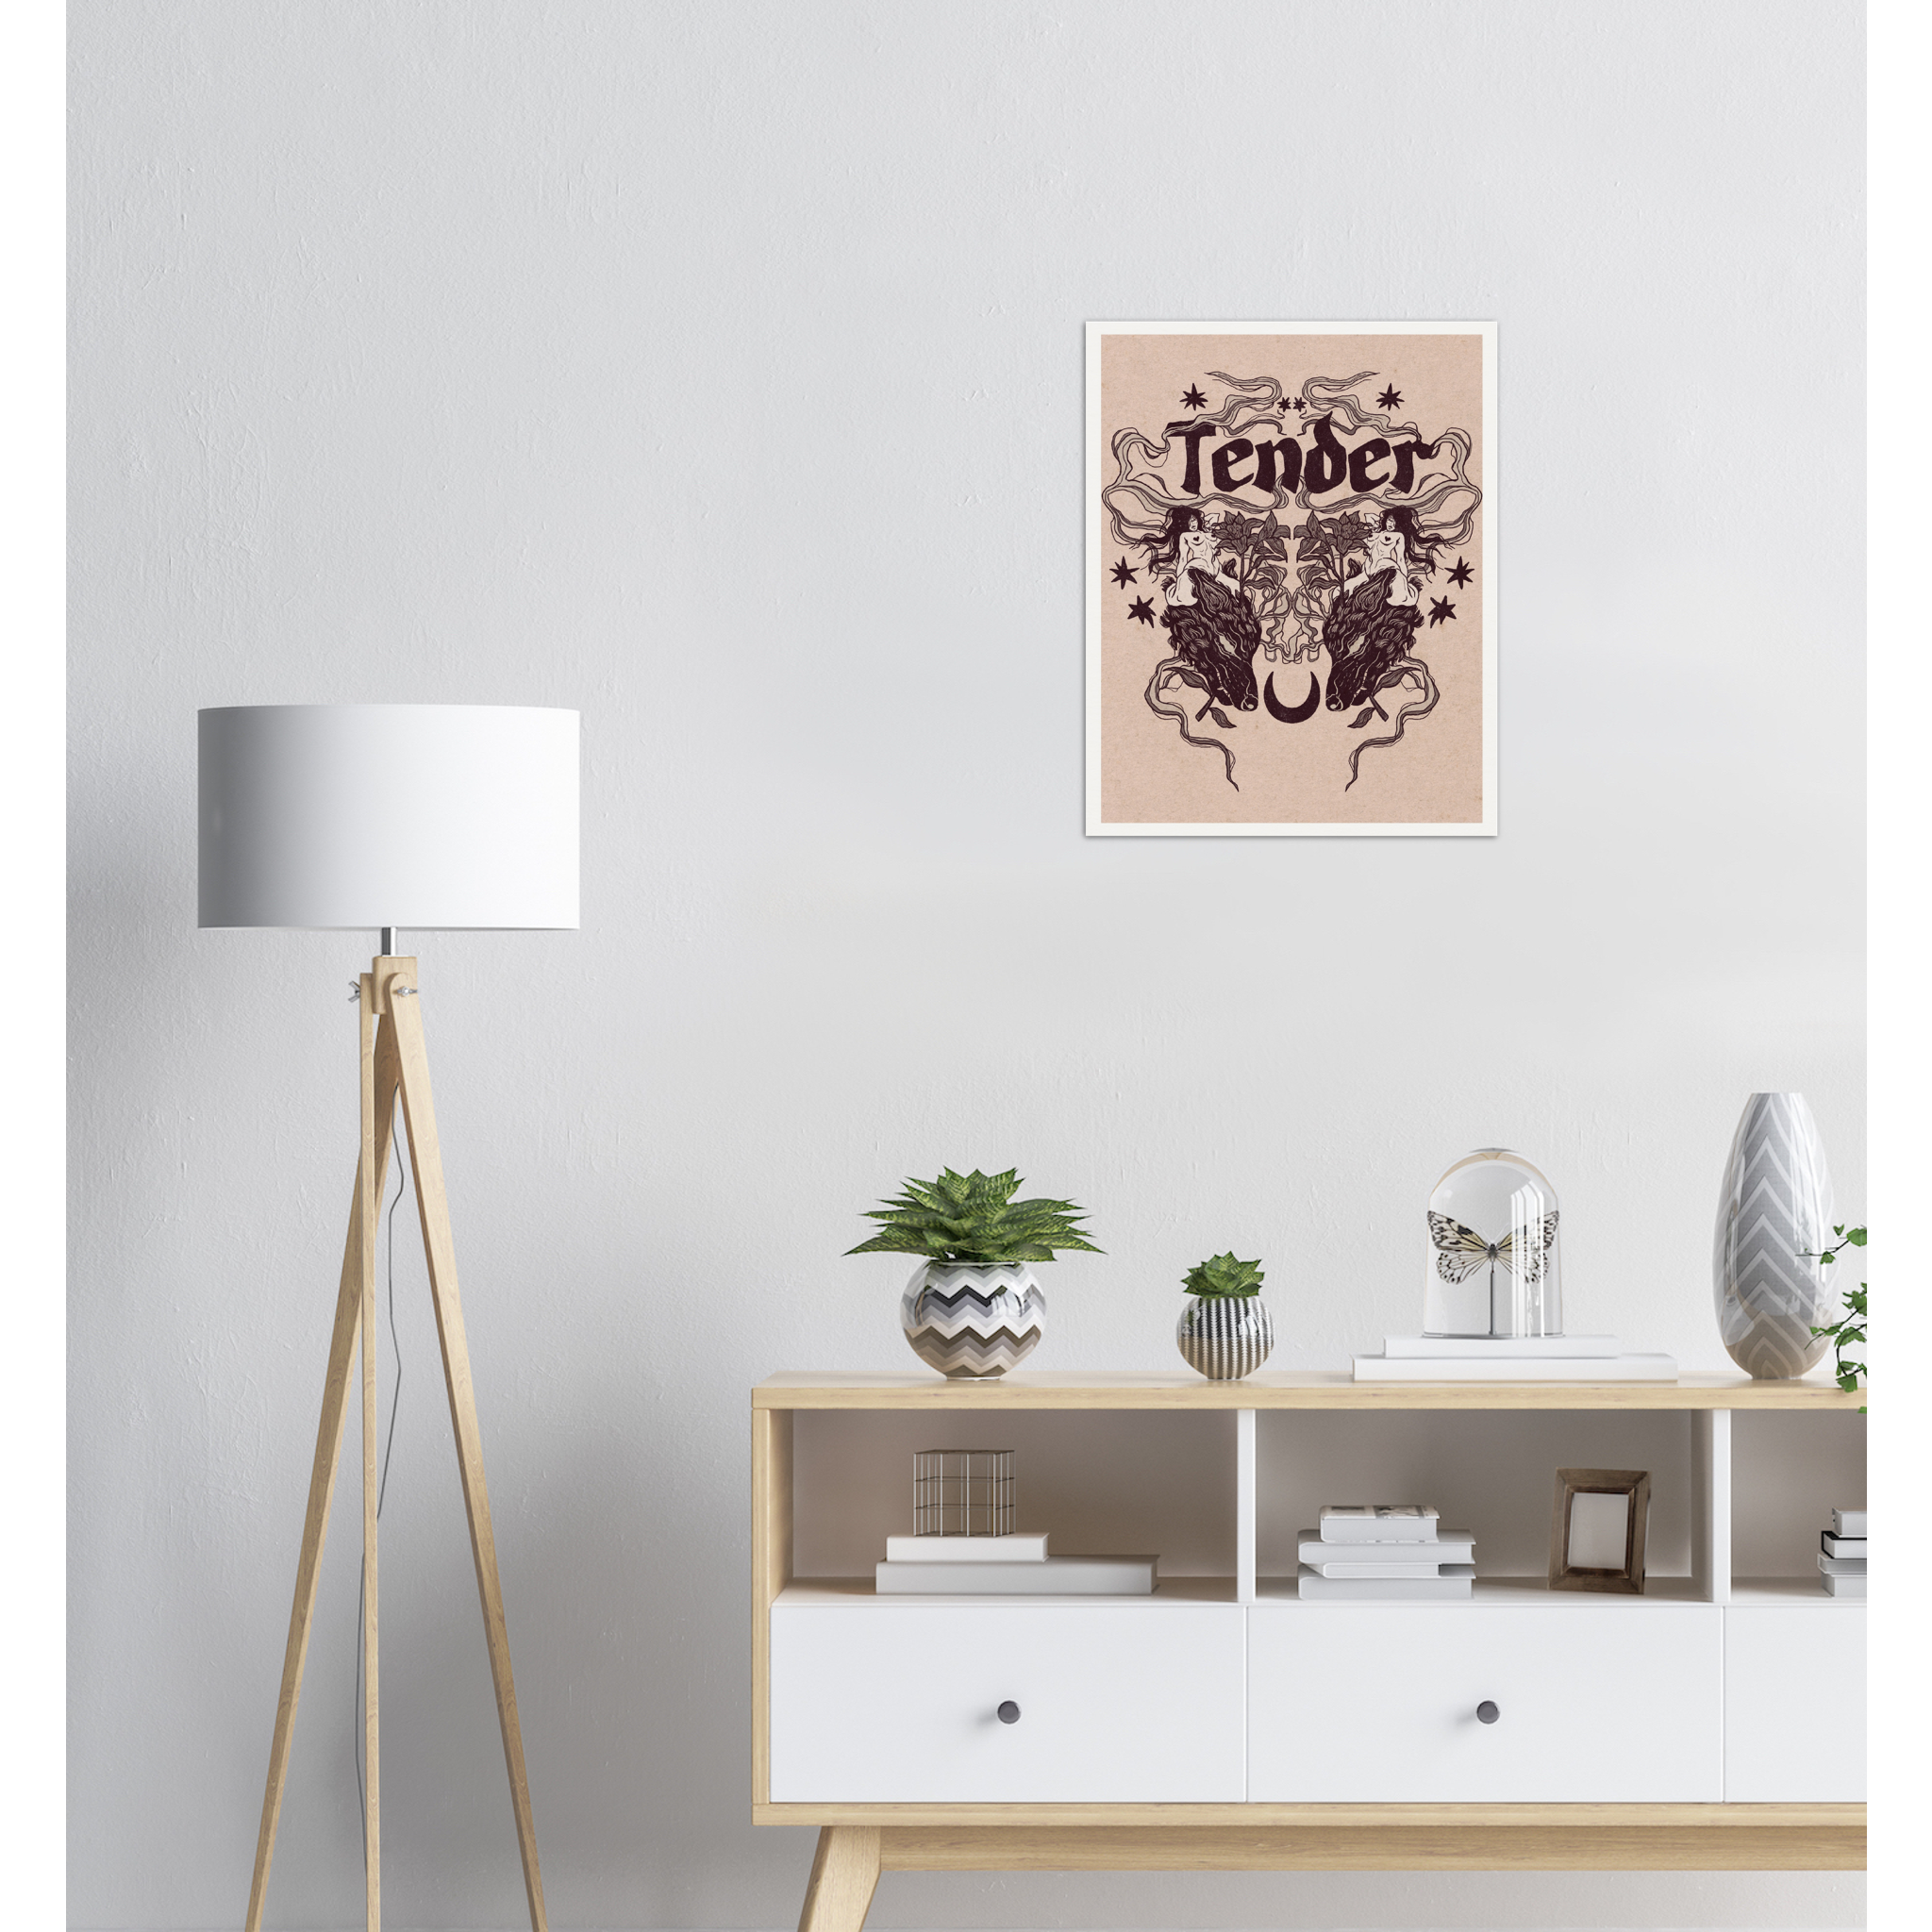 Tender-Museum-Quality Matte Paper Poster